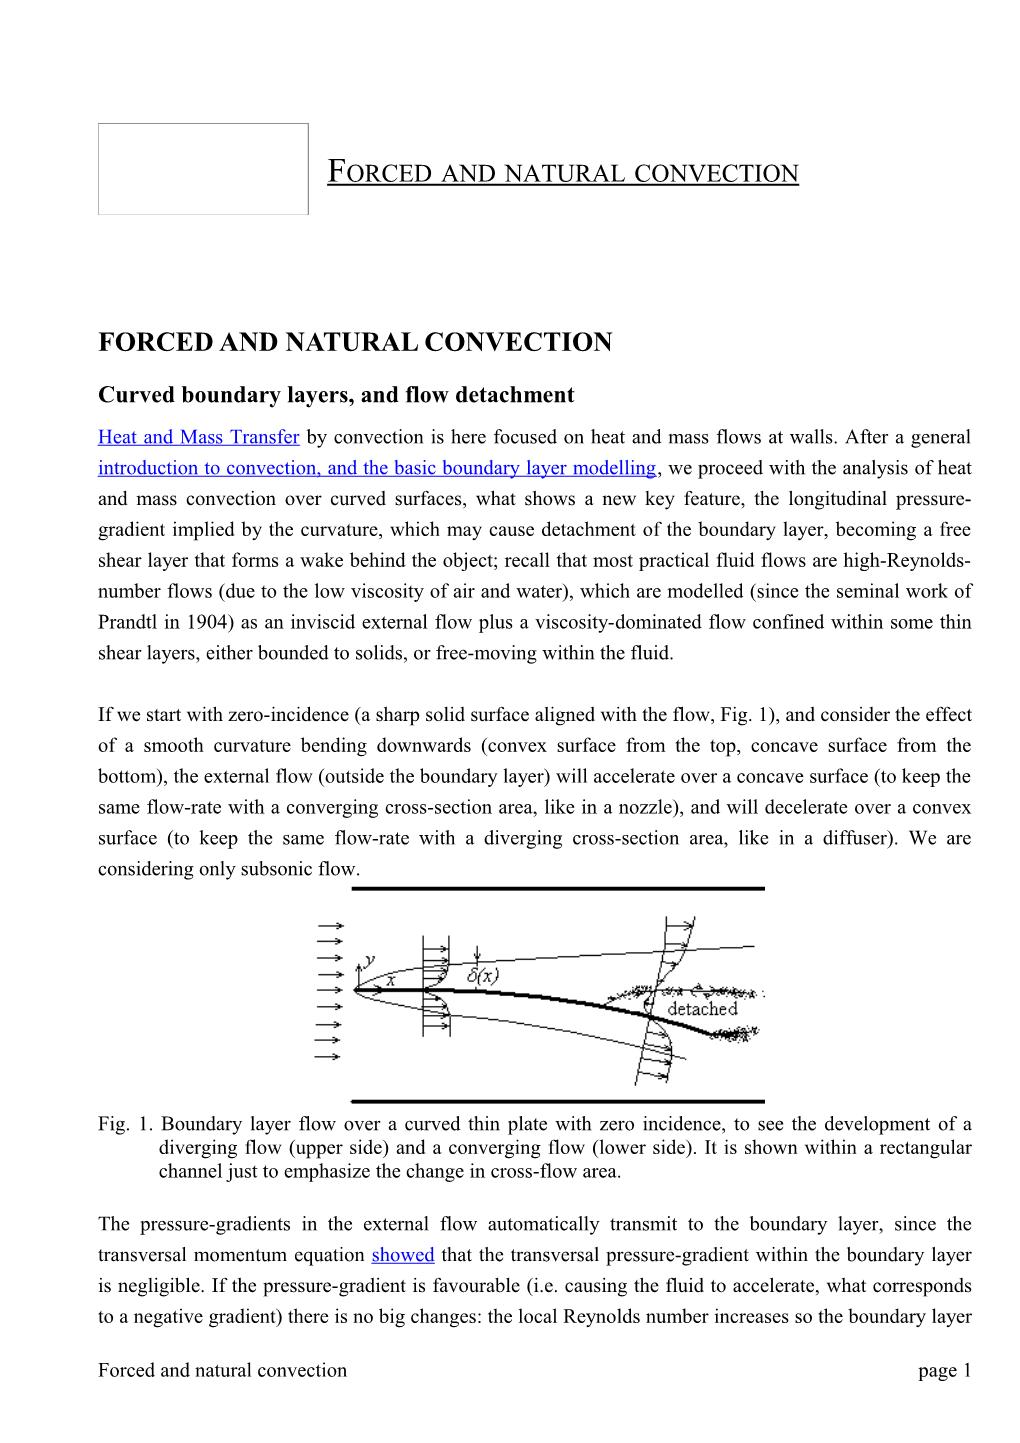 Forced and Natural Convection